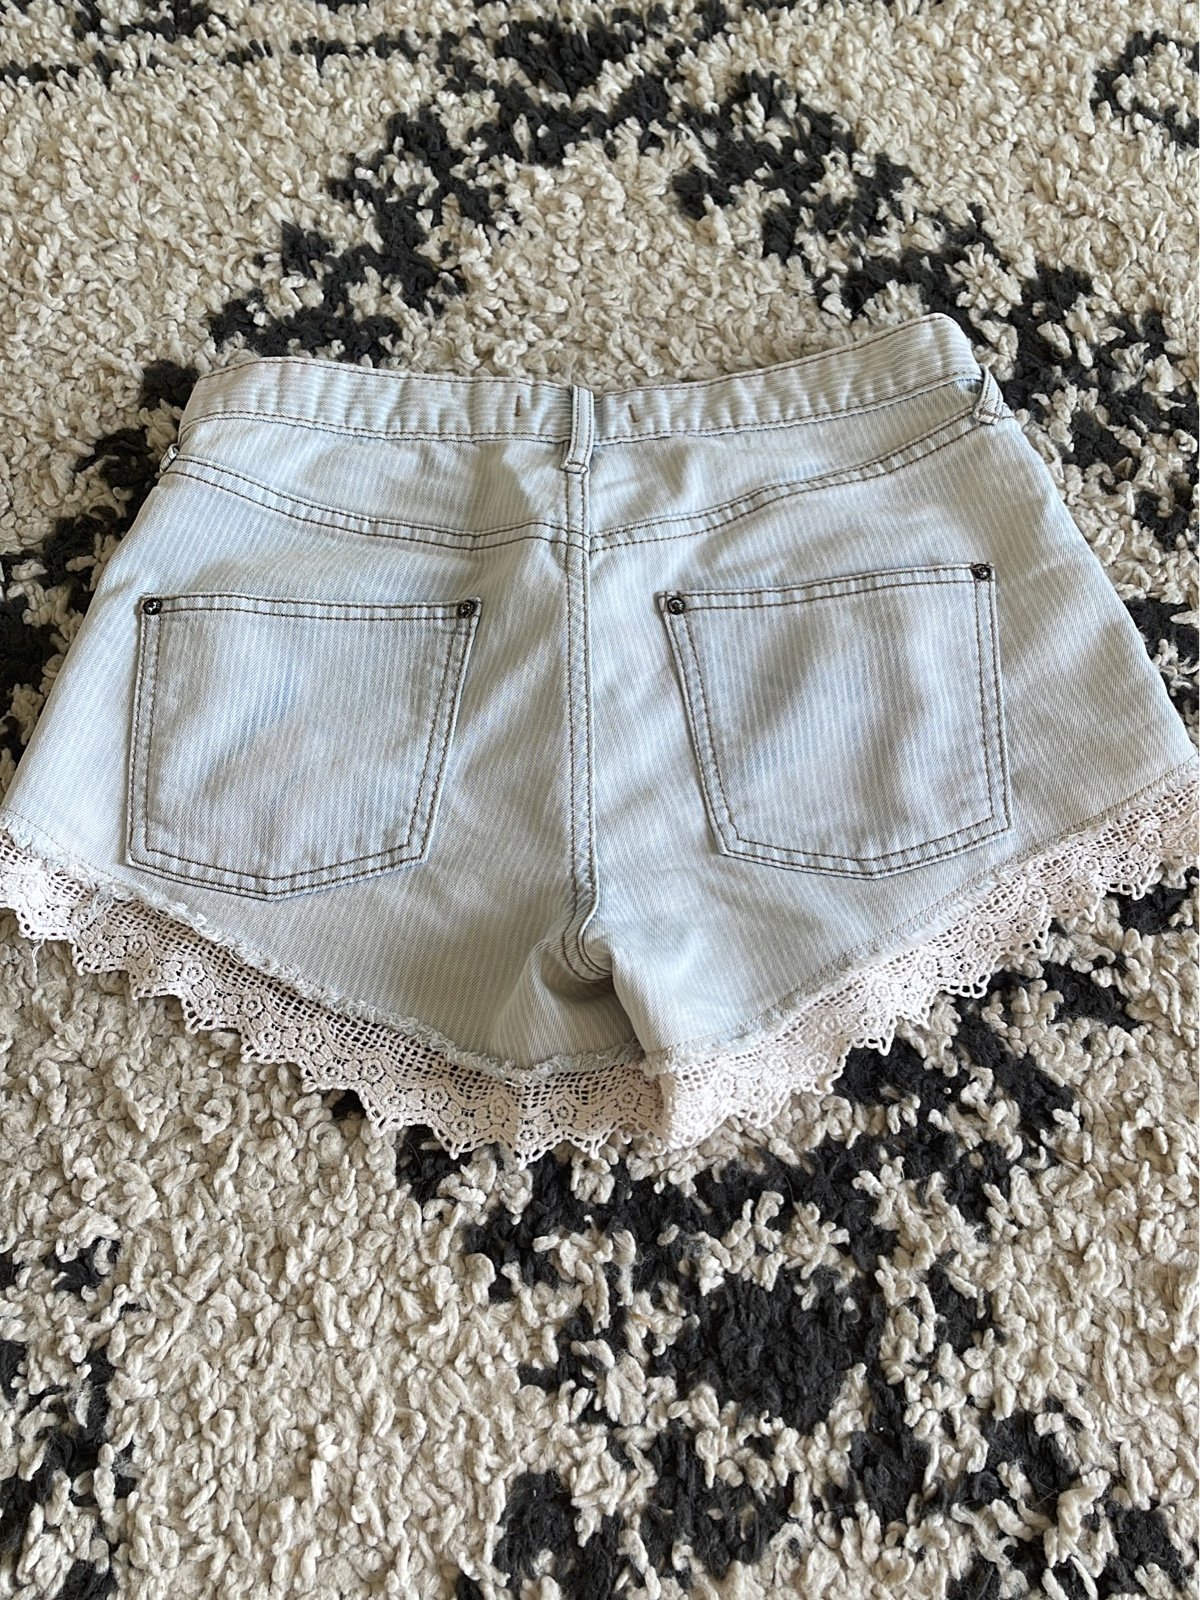 Popular Free people Jean Shorts nZ87nfgFx Buying Cheap